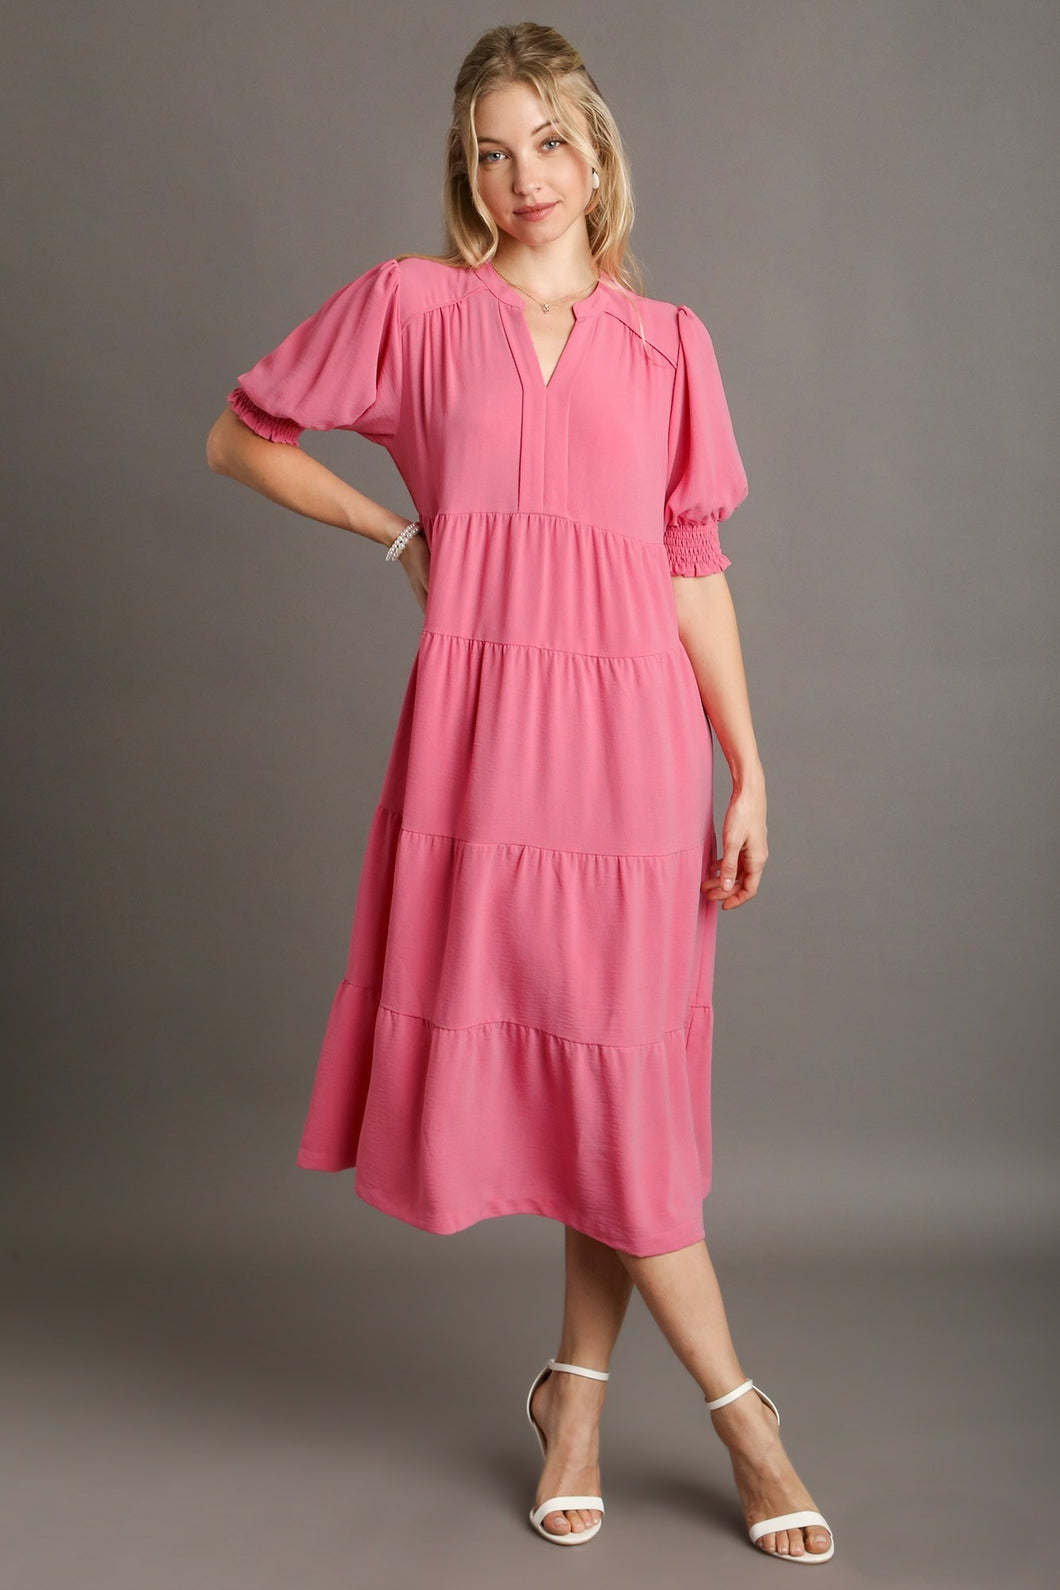 Umgee Solid Color A-Line Tiered Midi Dress with Piping Details in Rose Pink Dresses Umgee   